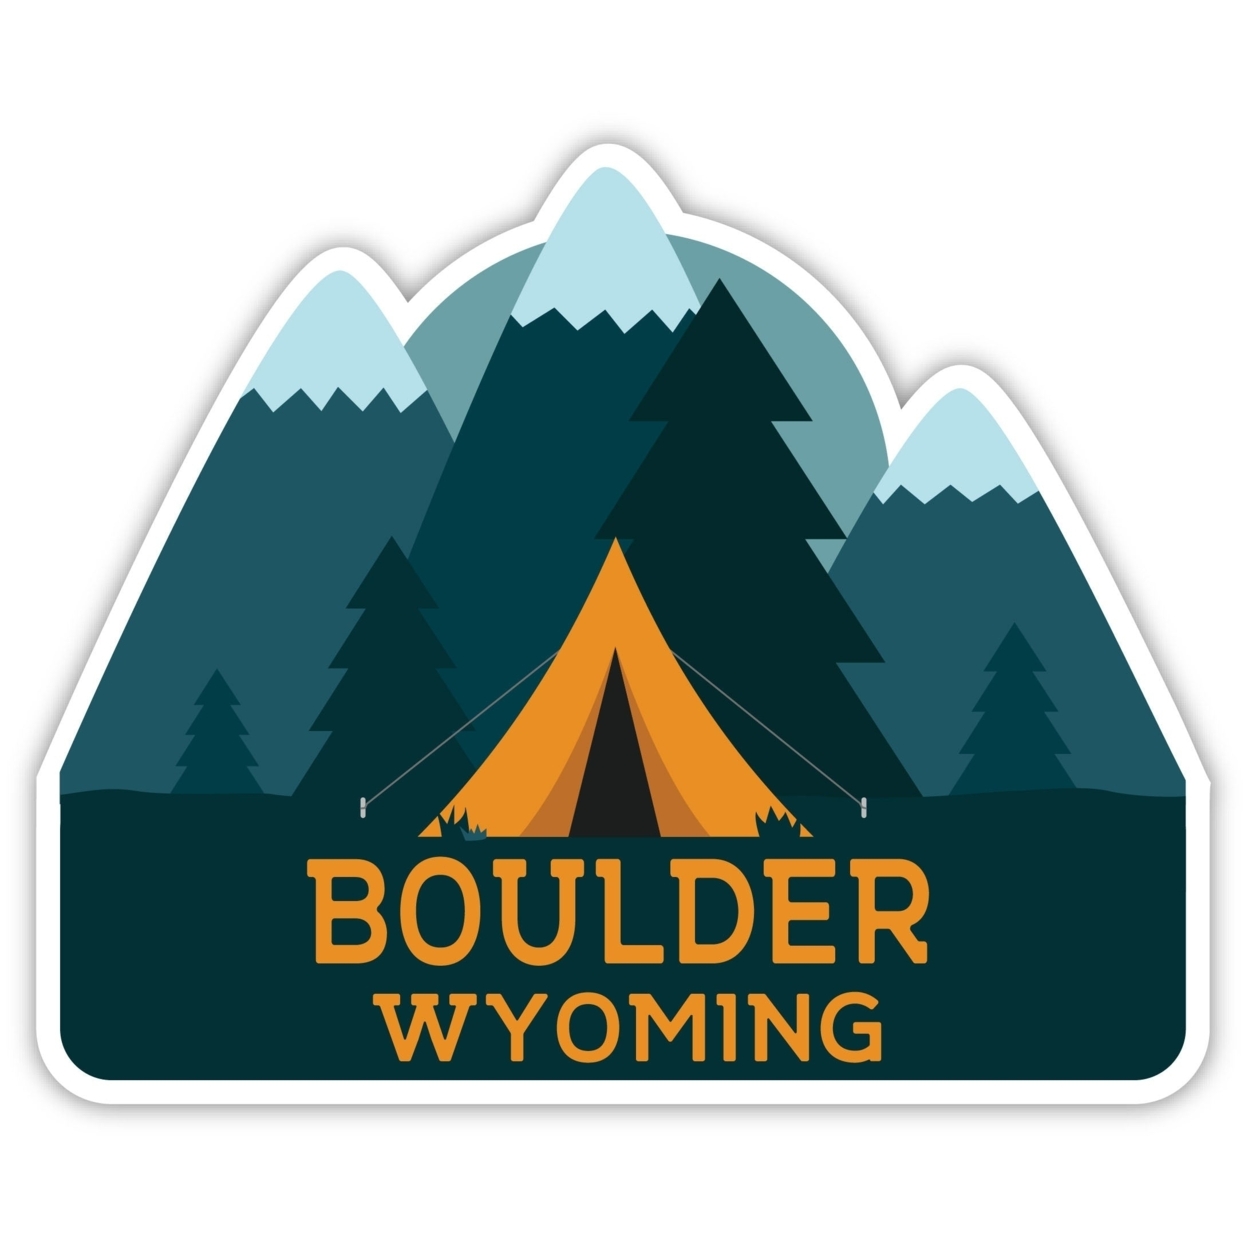 Boulder Wyoming Souvenir Decorative Stickers (Choose Theme And Size) - 4-Pack, 6-Inch, Tent